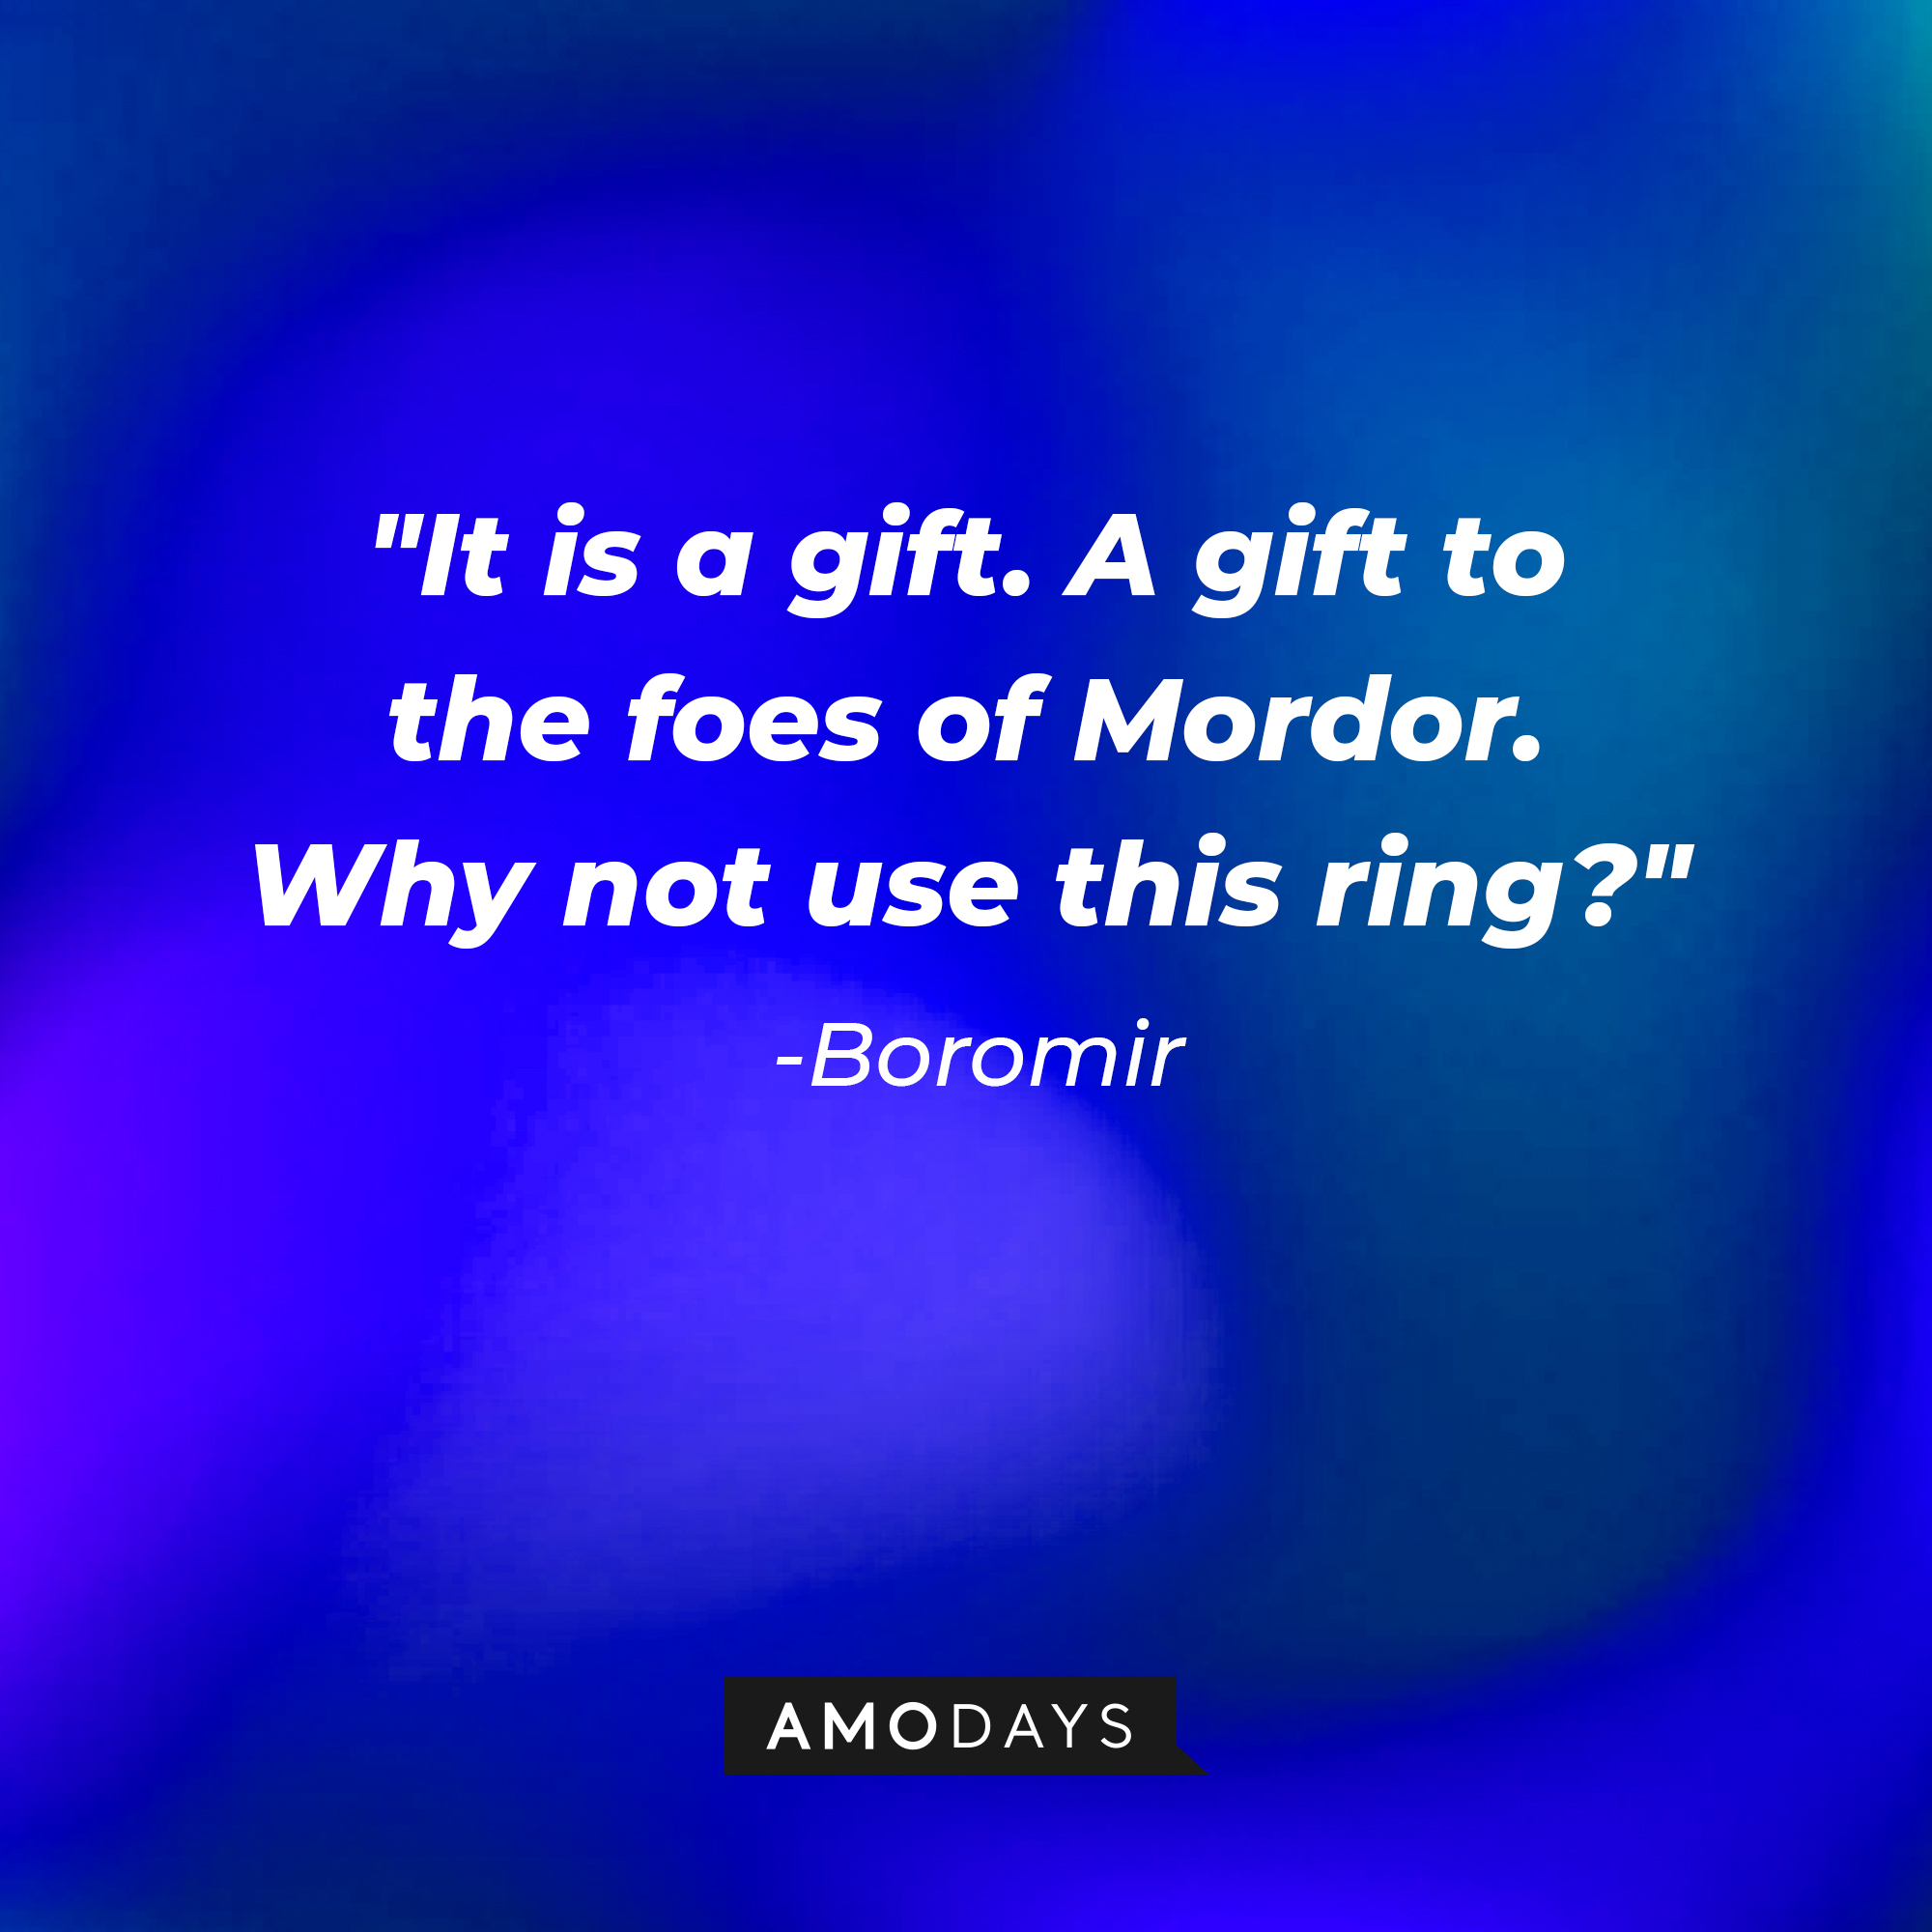 Boromir's quote: "It is a gift. A gift to the foes of Mordor. Why not use this ring?" | Source: AmoDays